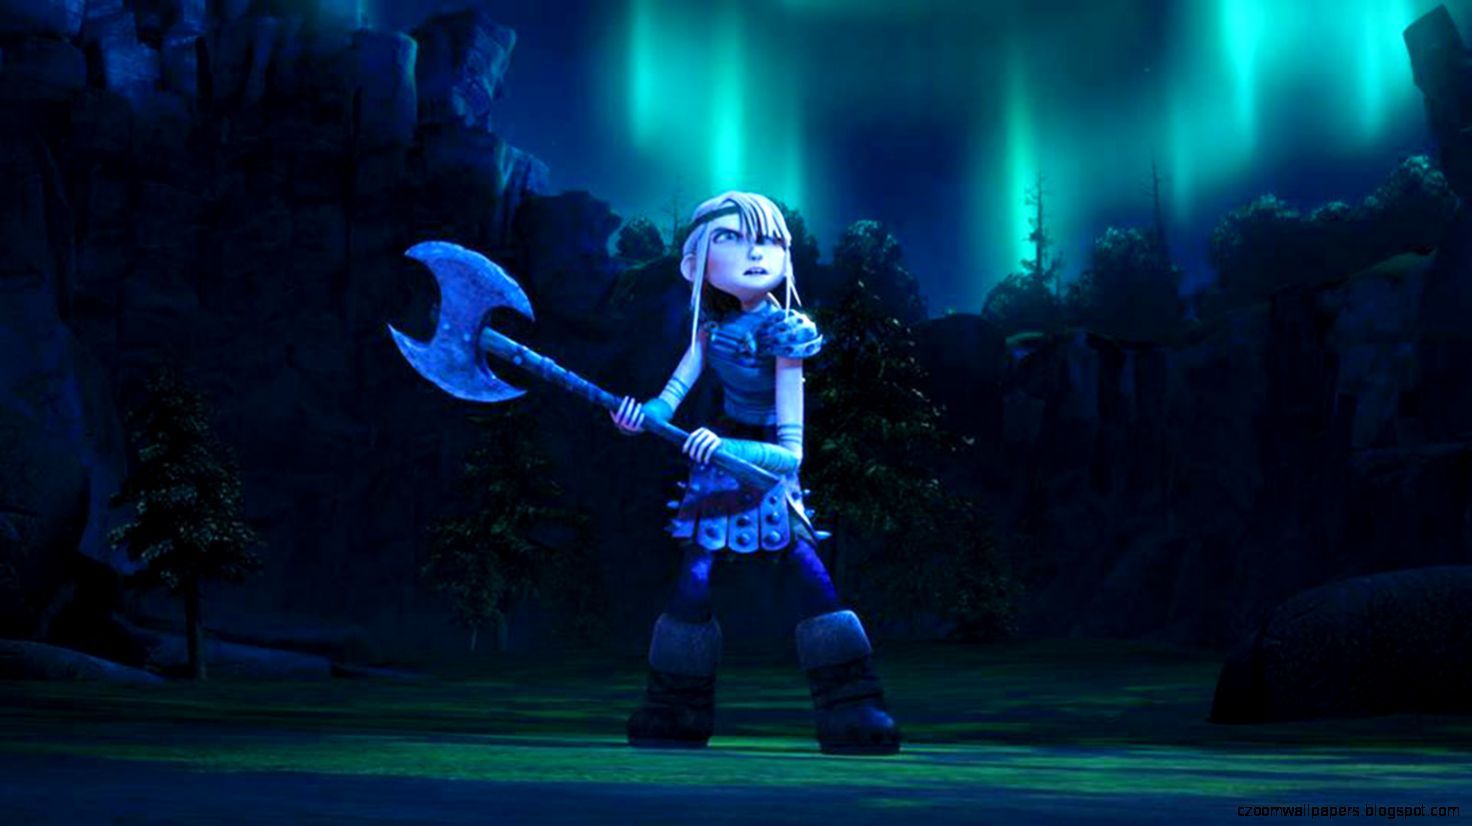 How To Train Your Dragon 2 Stills HD Wallpaper